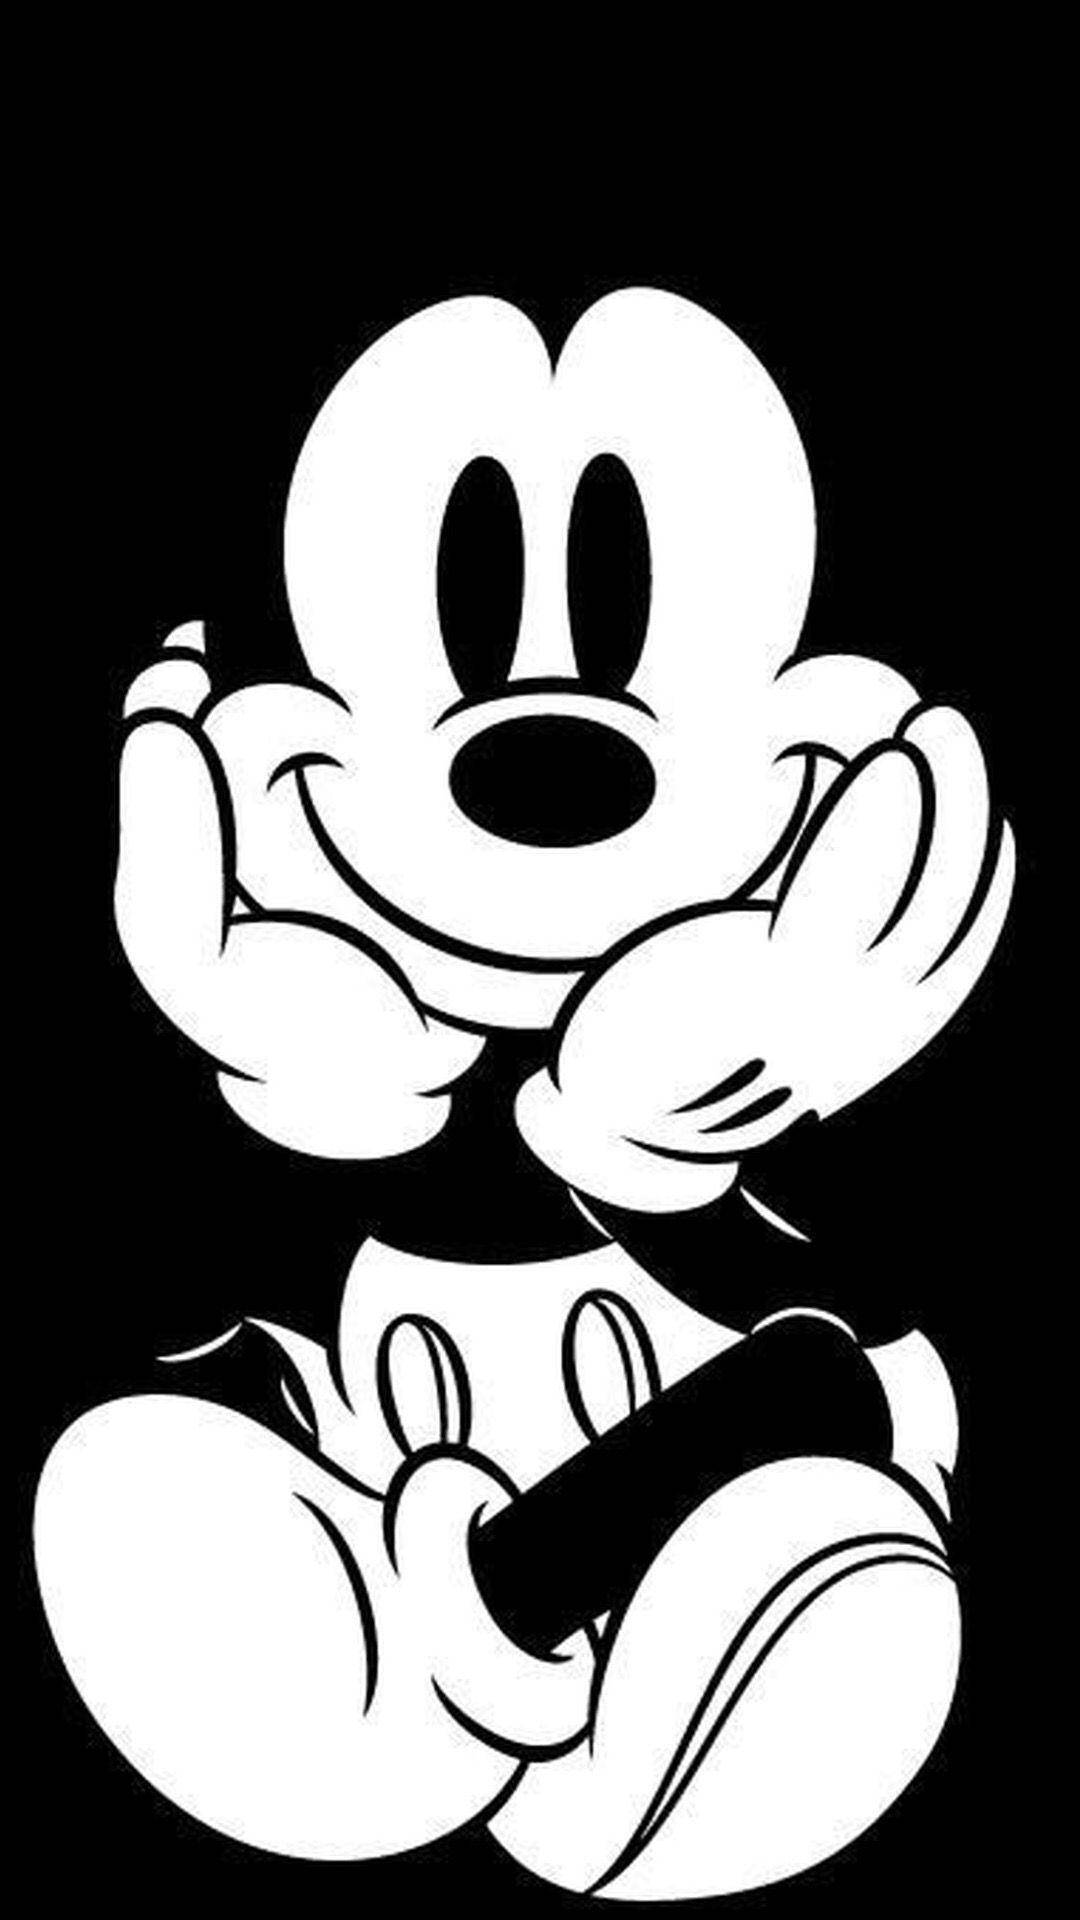 Black And White Mickey Mouse Iphone